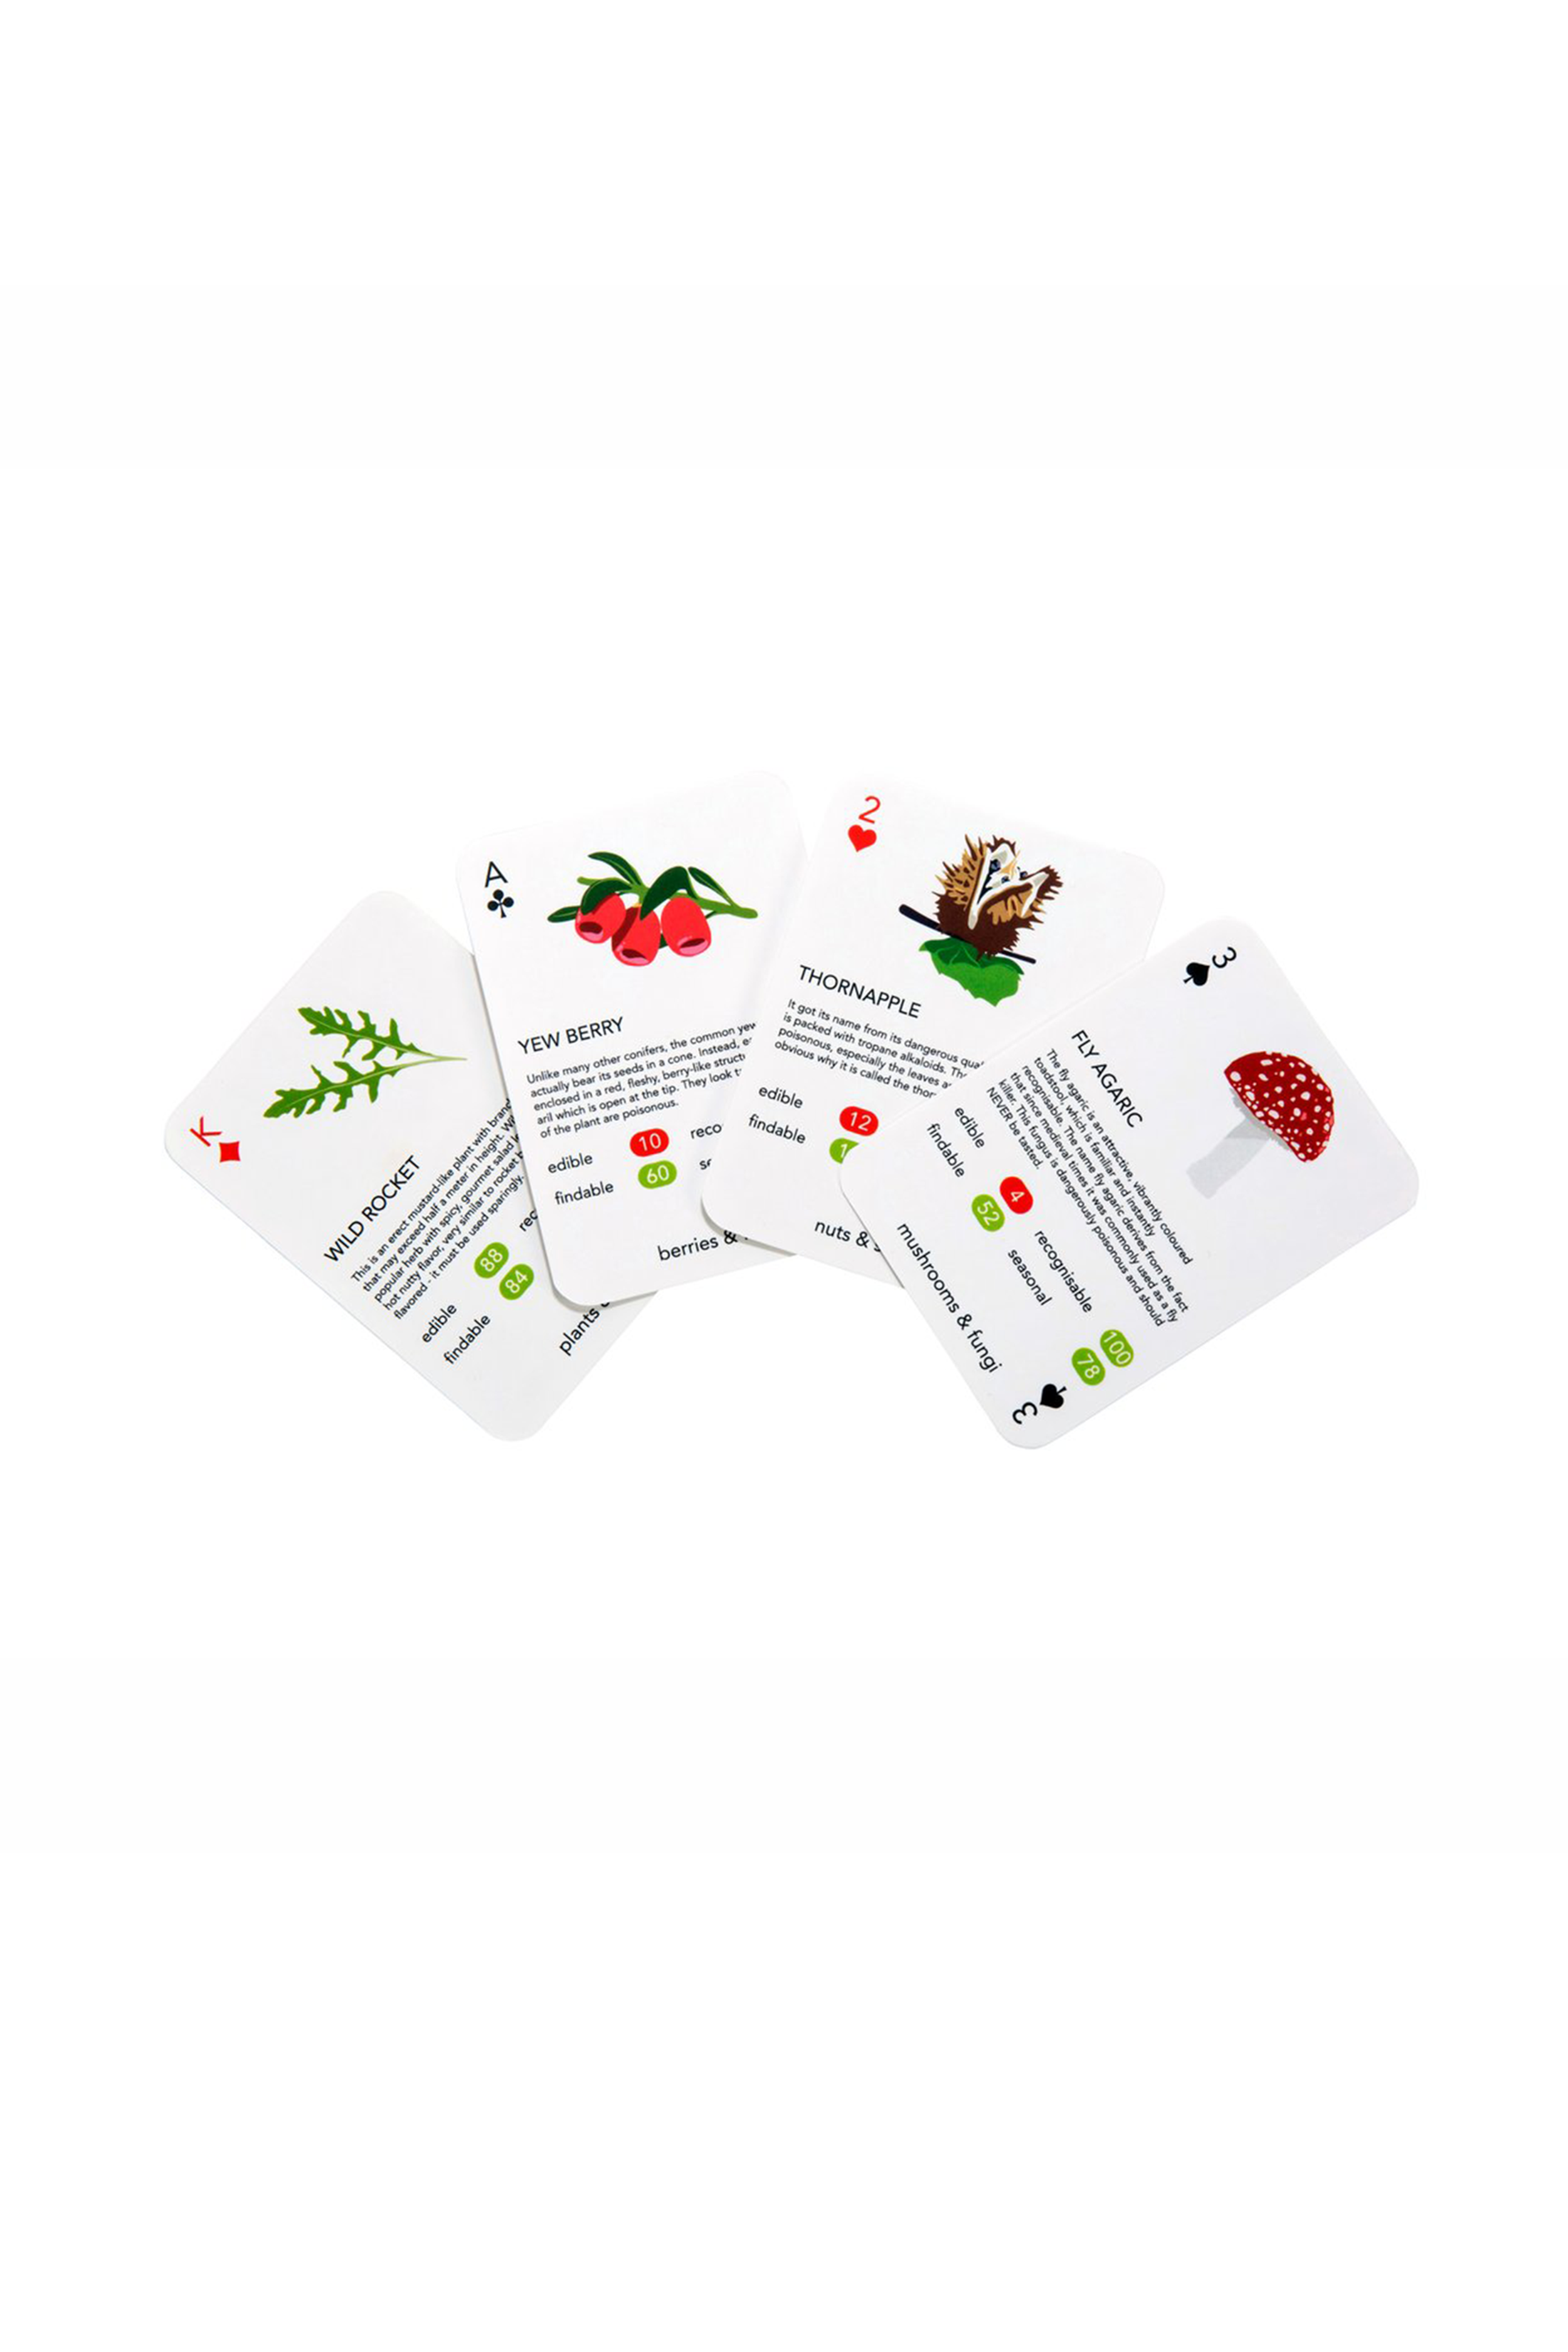 Foragers Playing Cards - Philistine